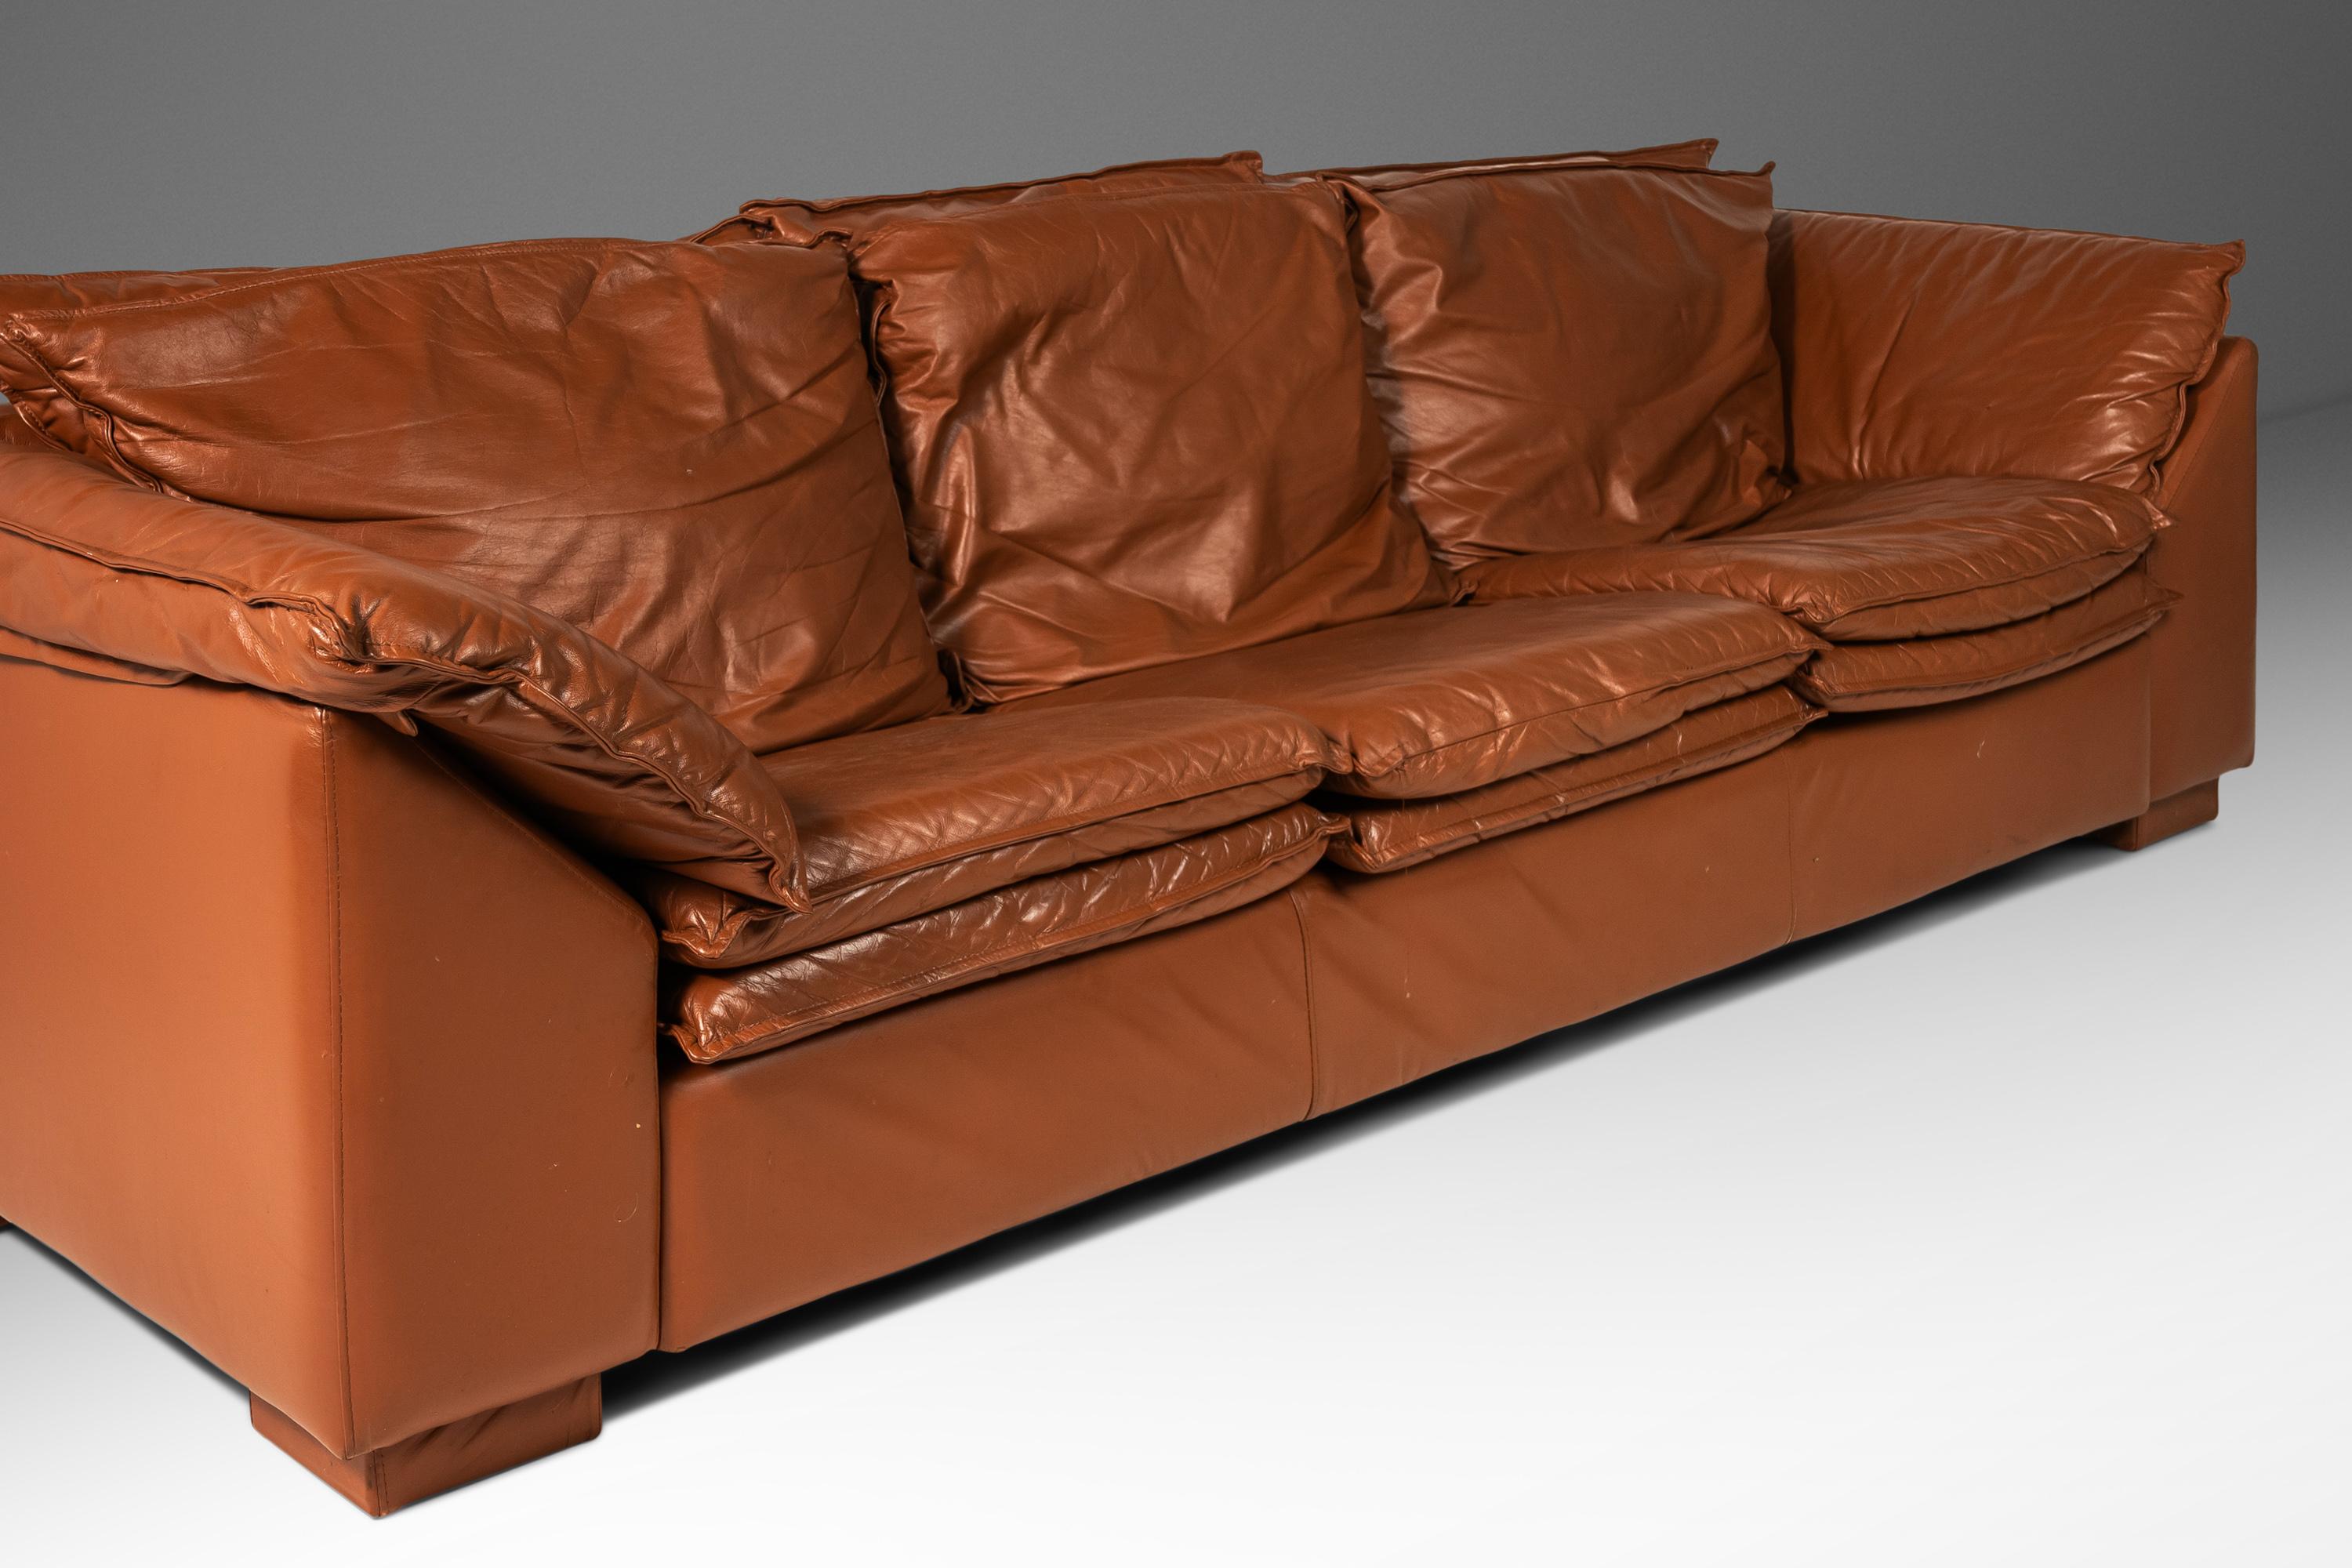 Low Profile Sofa in Cognac Brown Leather in the Manner of Niels Eilersen, 1980's For Sale 10